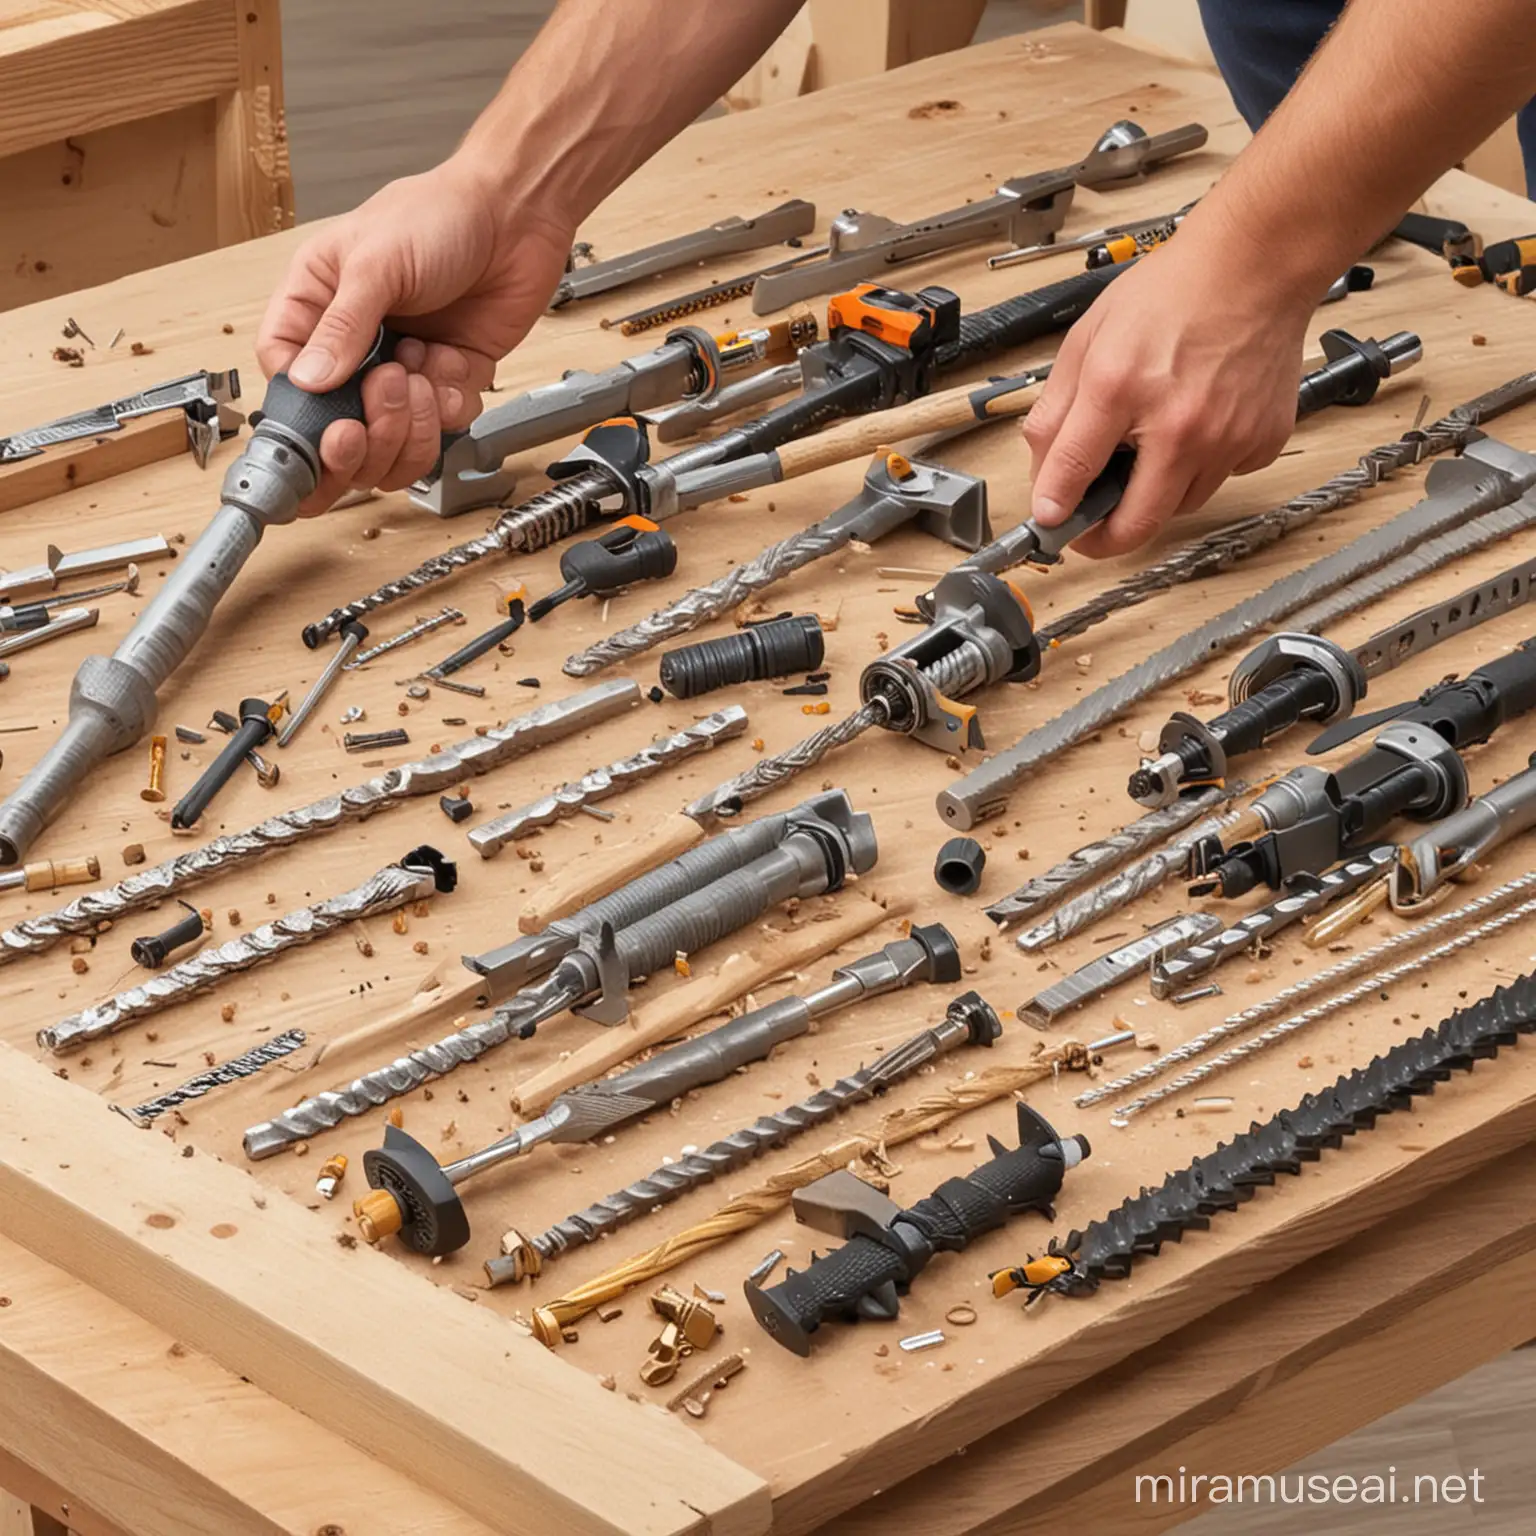 Woodworking Tools Crafting with Saws Hammers and Drills